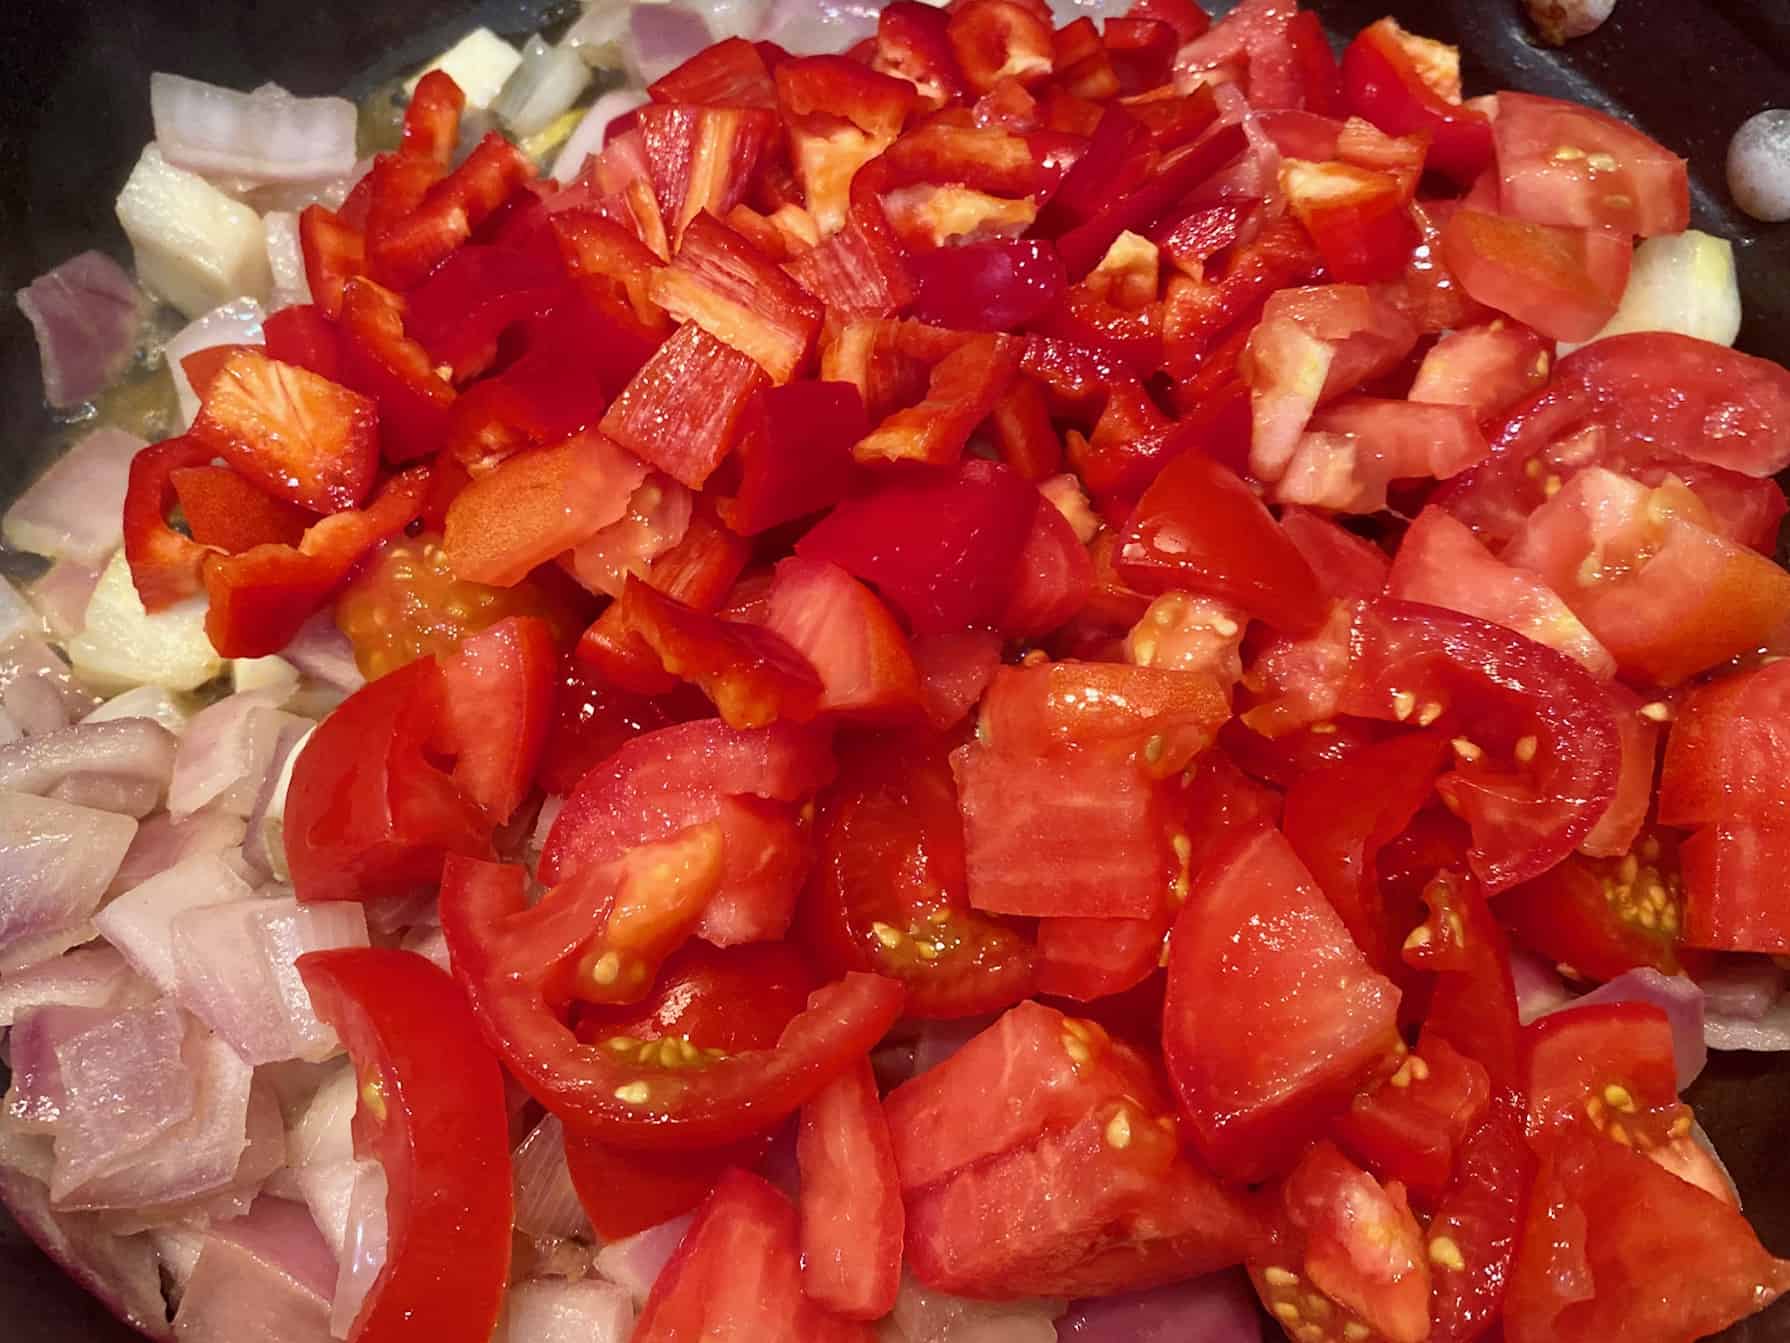 Add diced tomatoes and red pepper to sauteed onion.